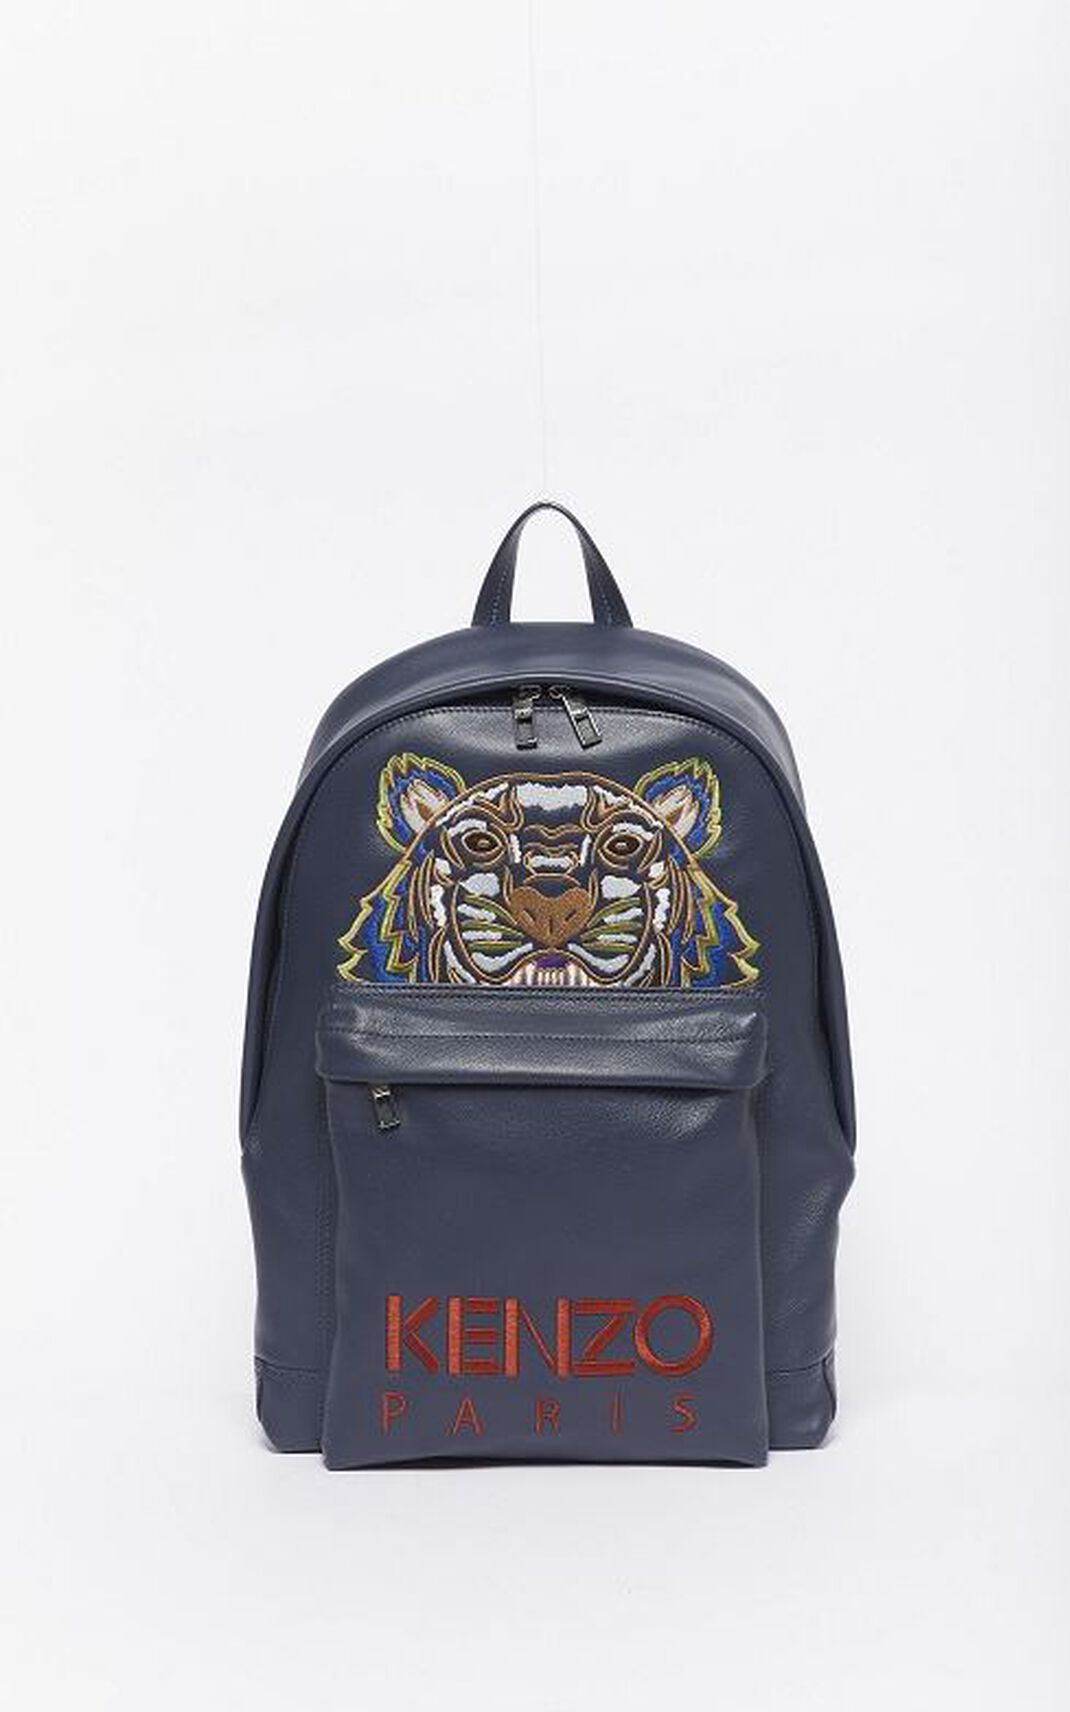 Kenzo Tiger leather Backpack Navy Blue For Mens 2863GNMDW